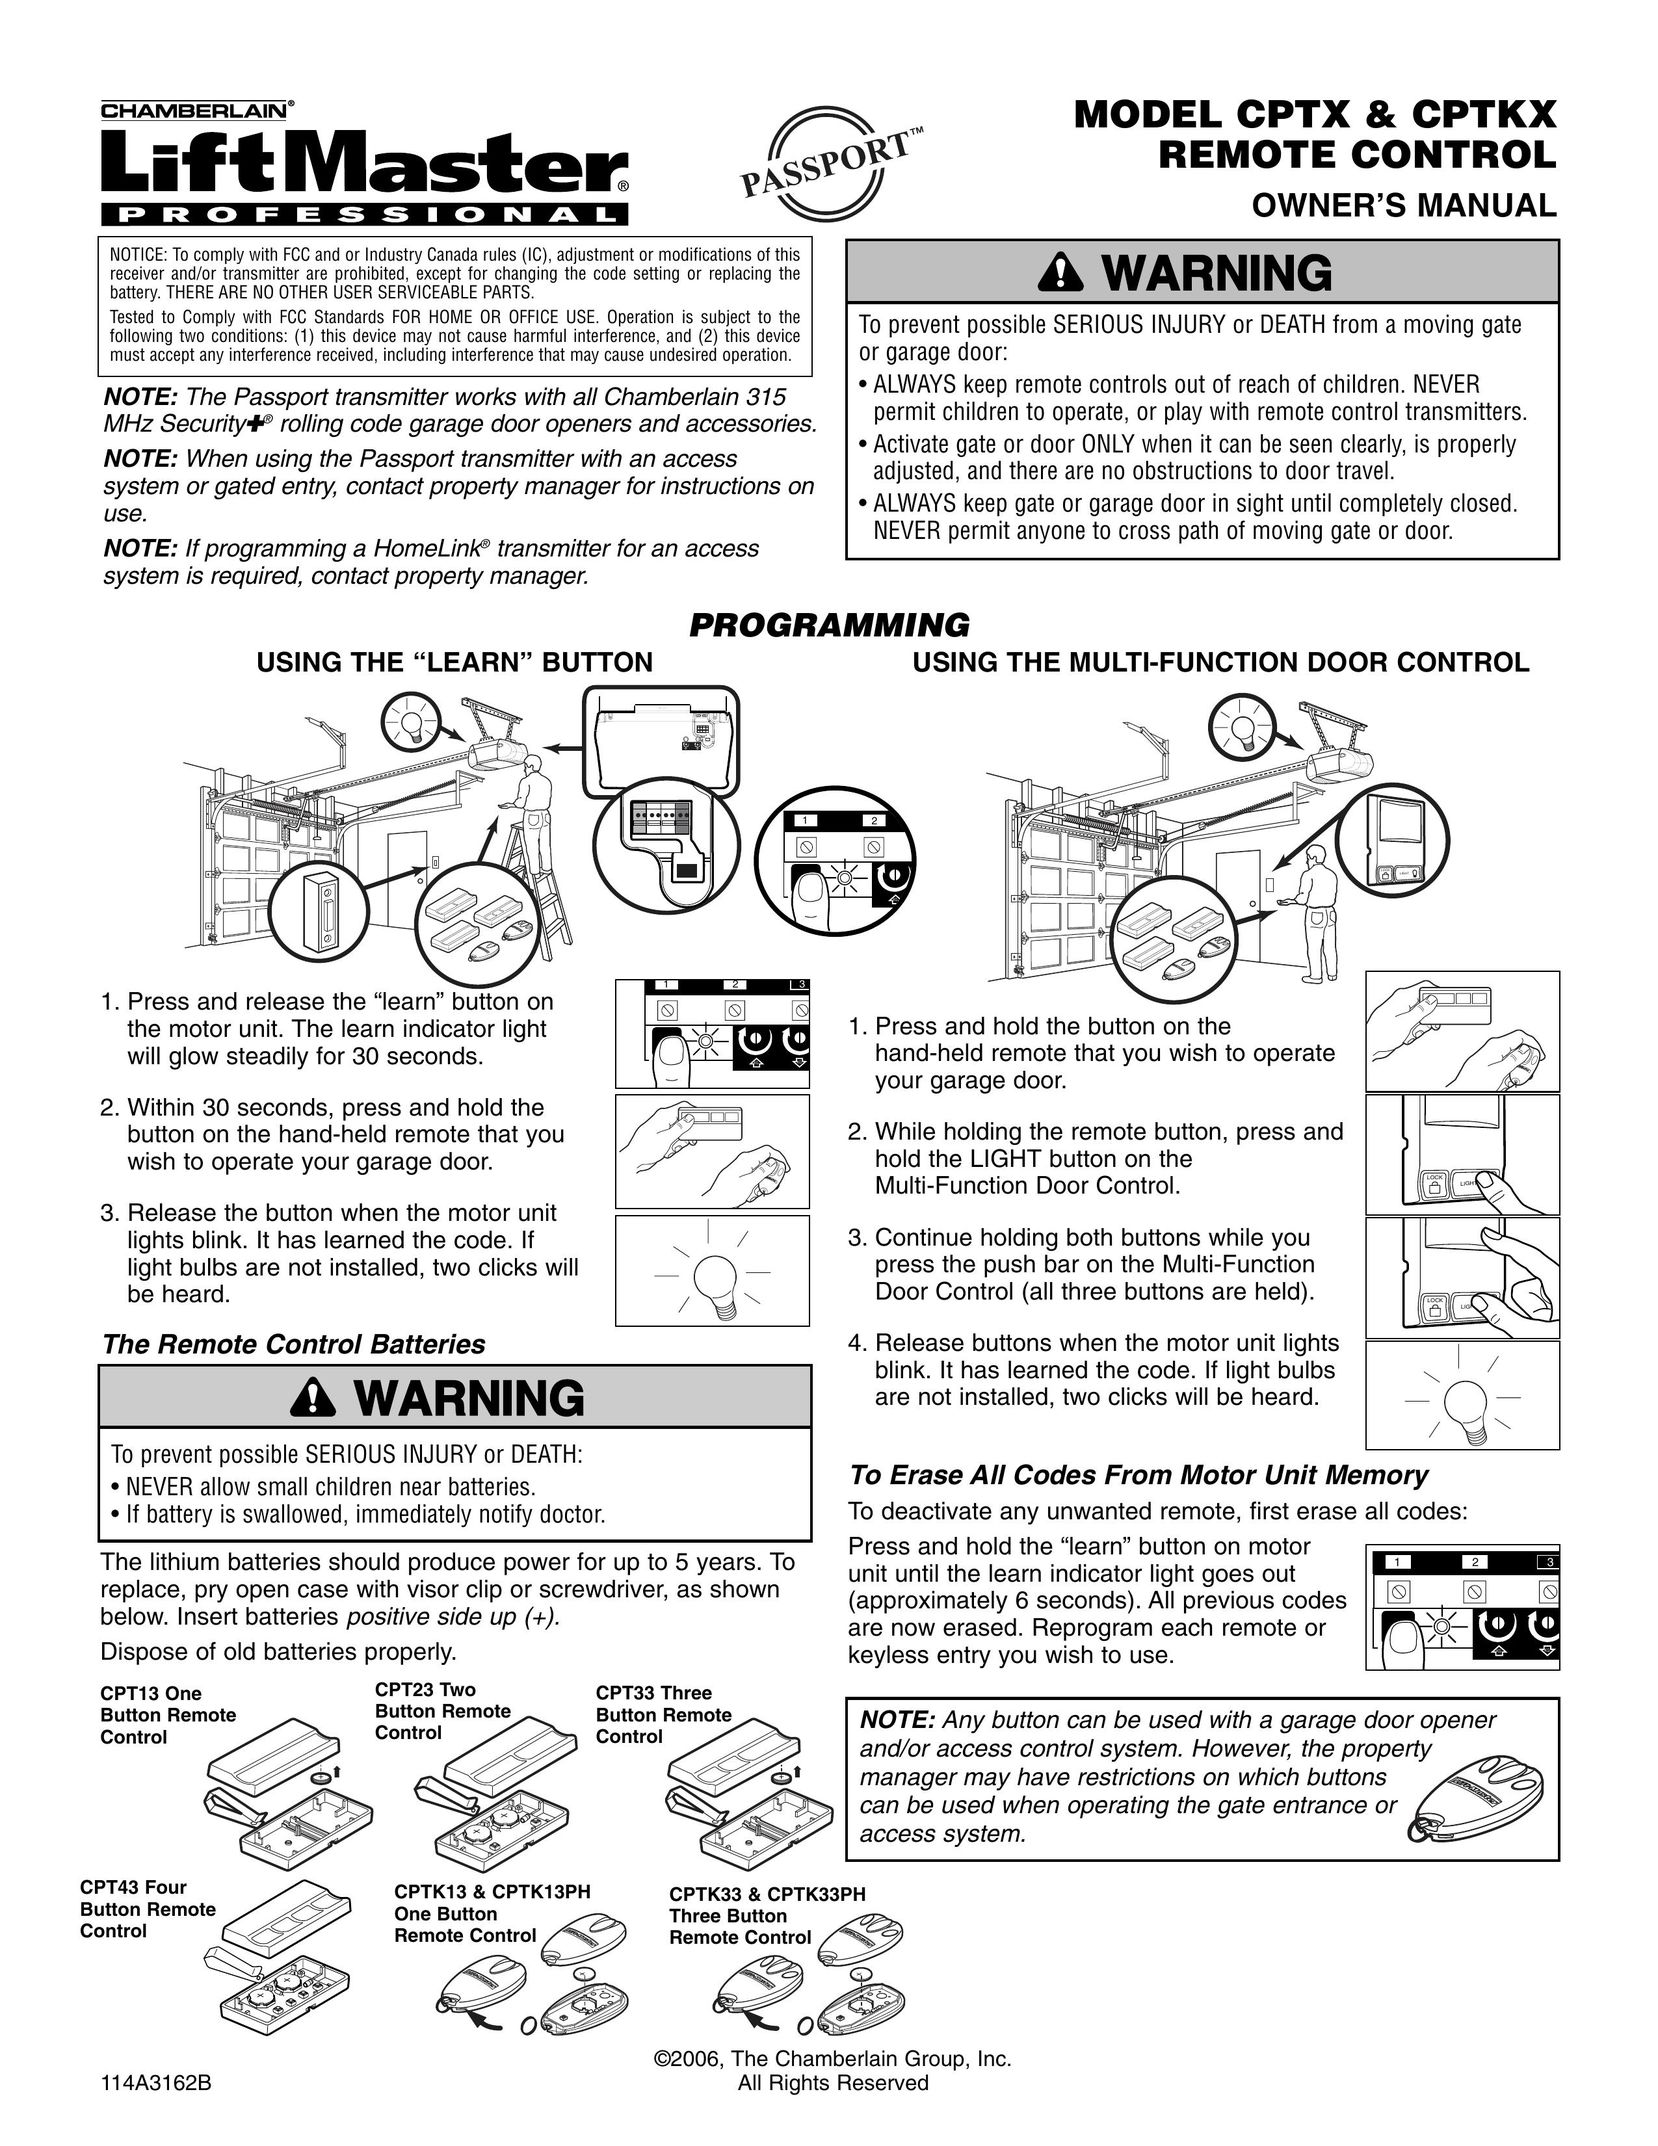 Chamberlain CPTX Universal Remote User Manual (Page 1)